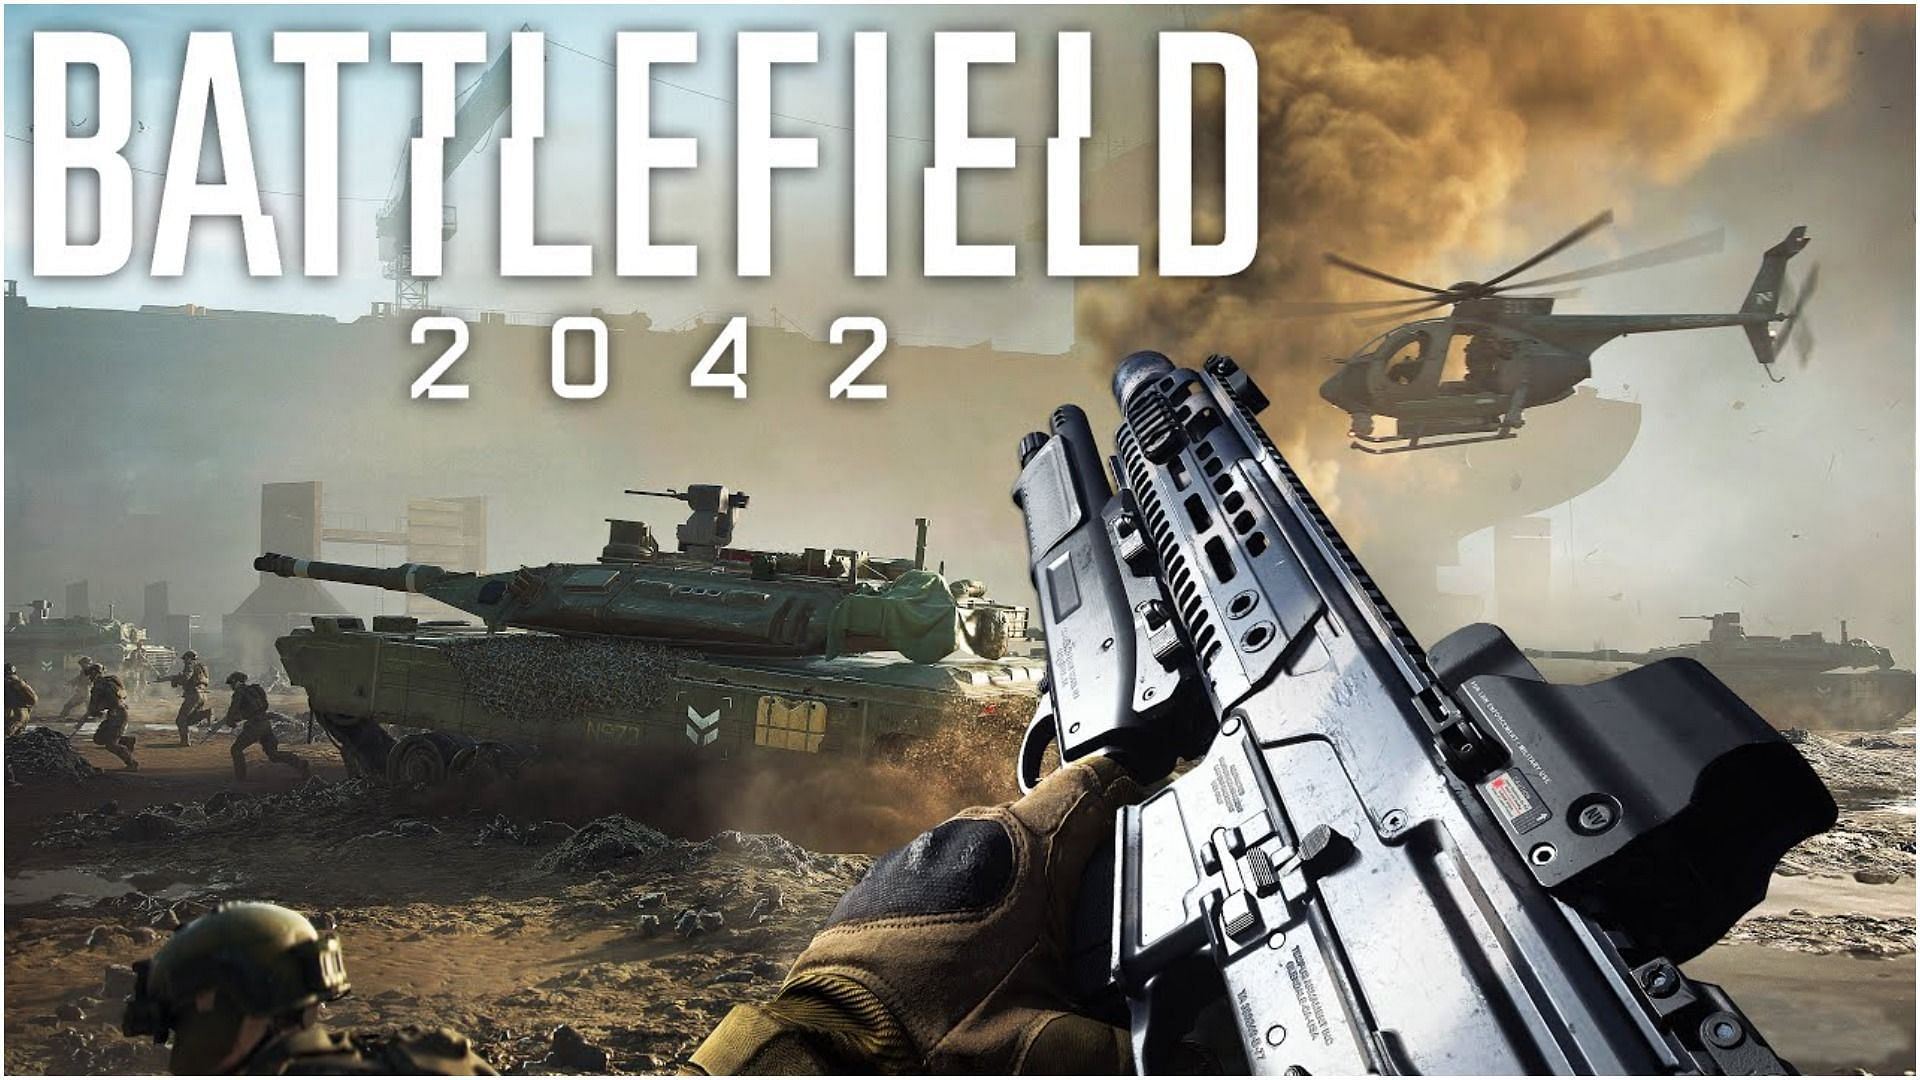 Fans are really unhappy with the talks of a new Battlefield game (Image via YouTube/Jackfrags)